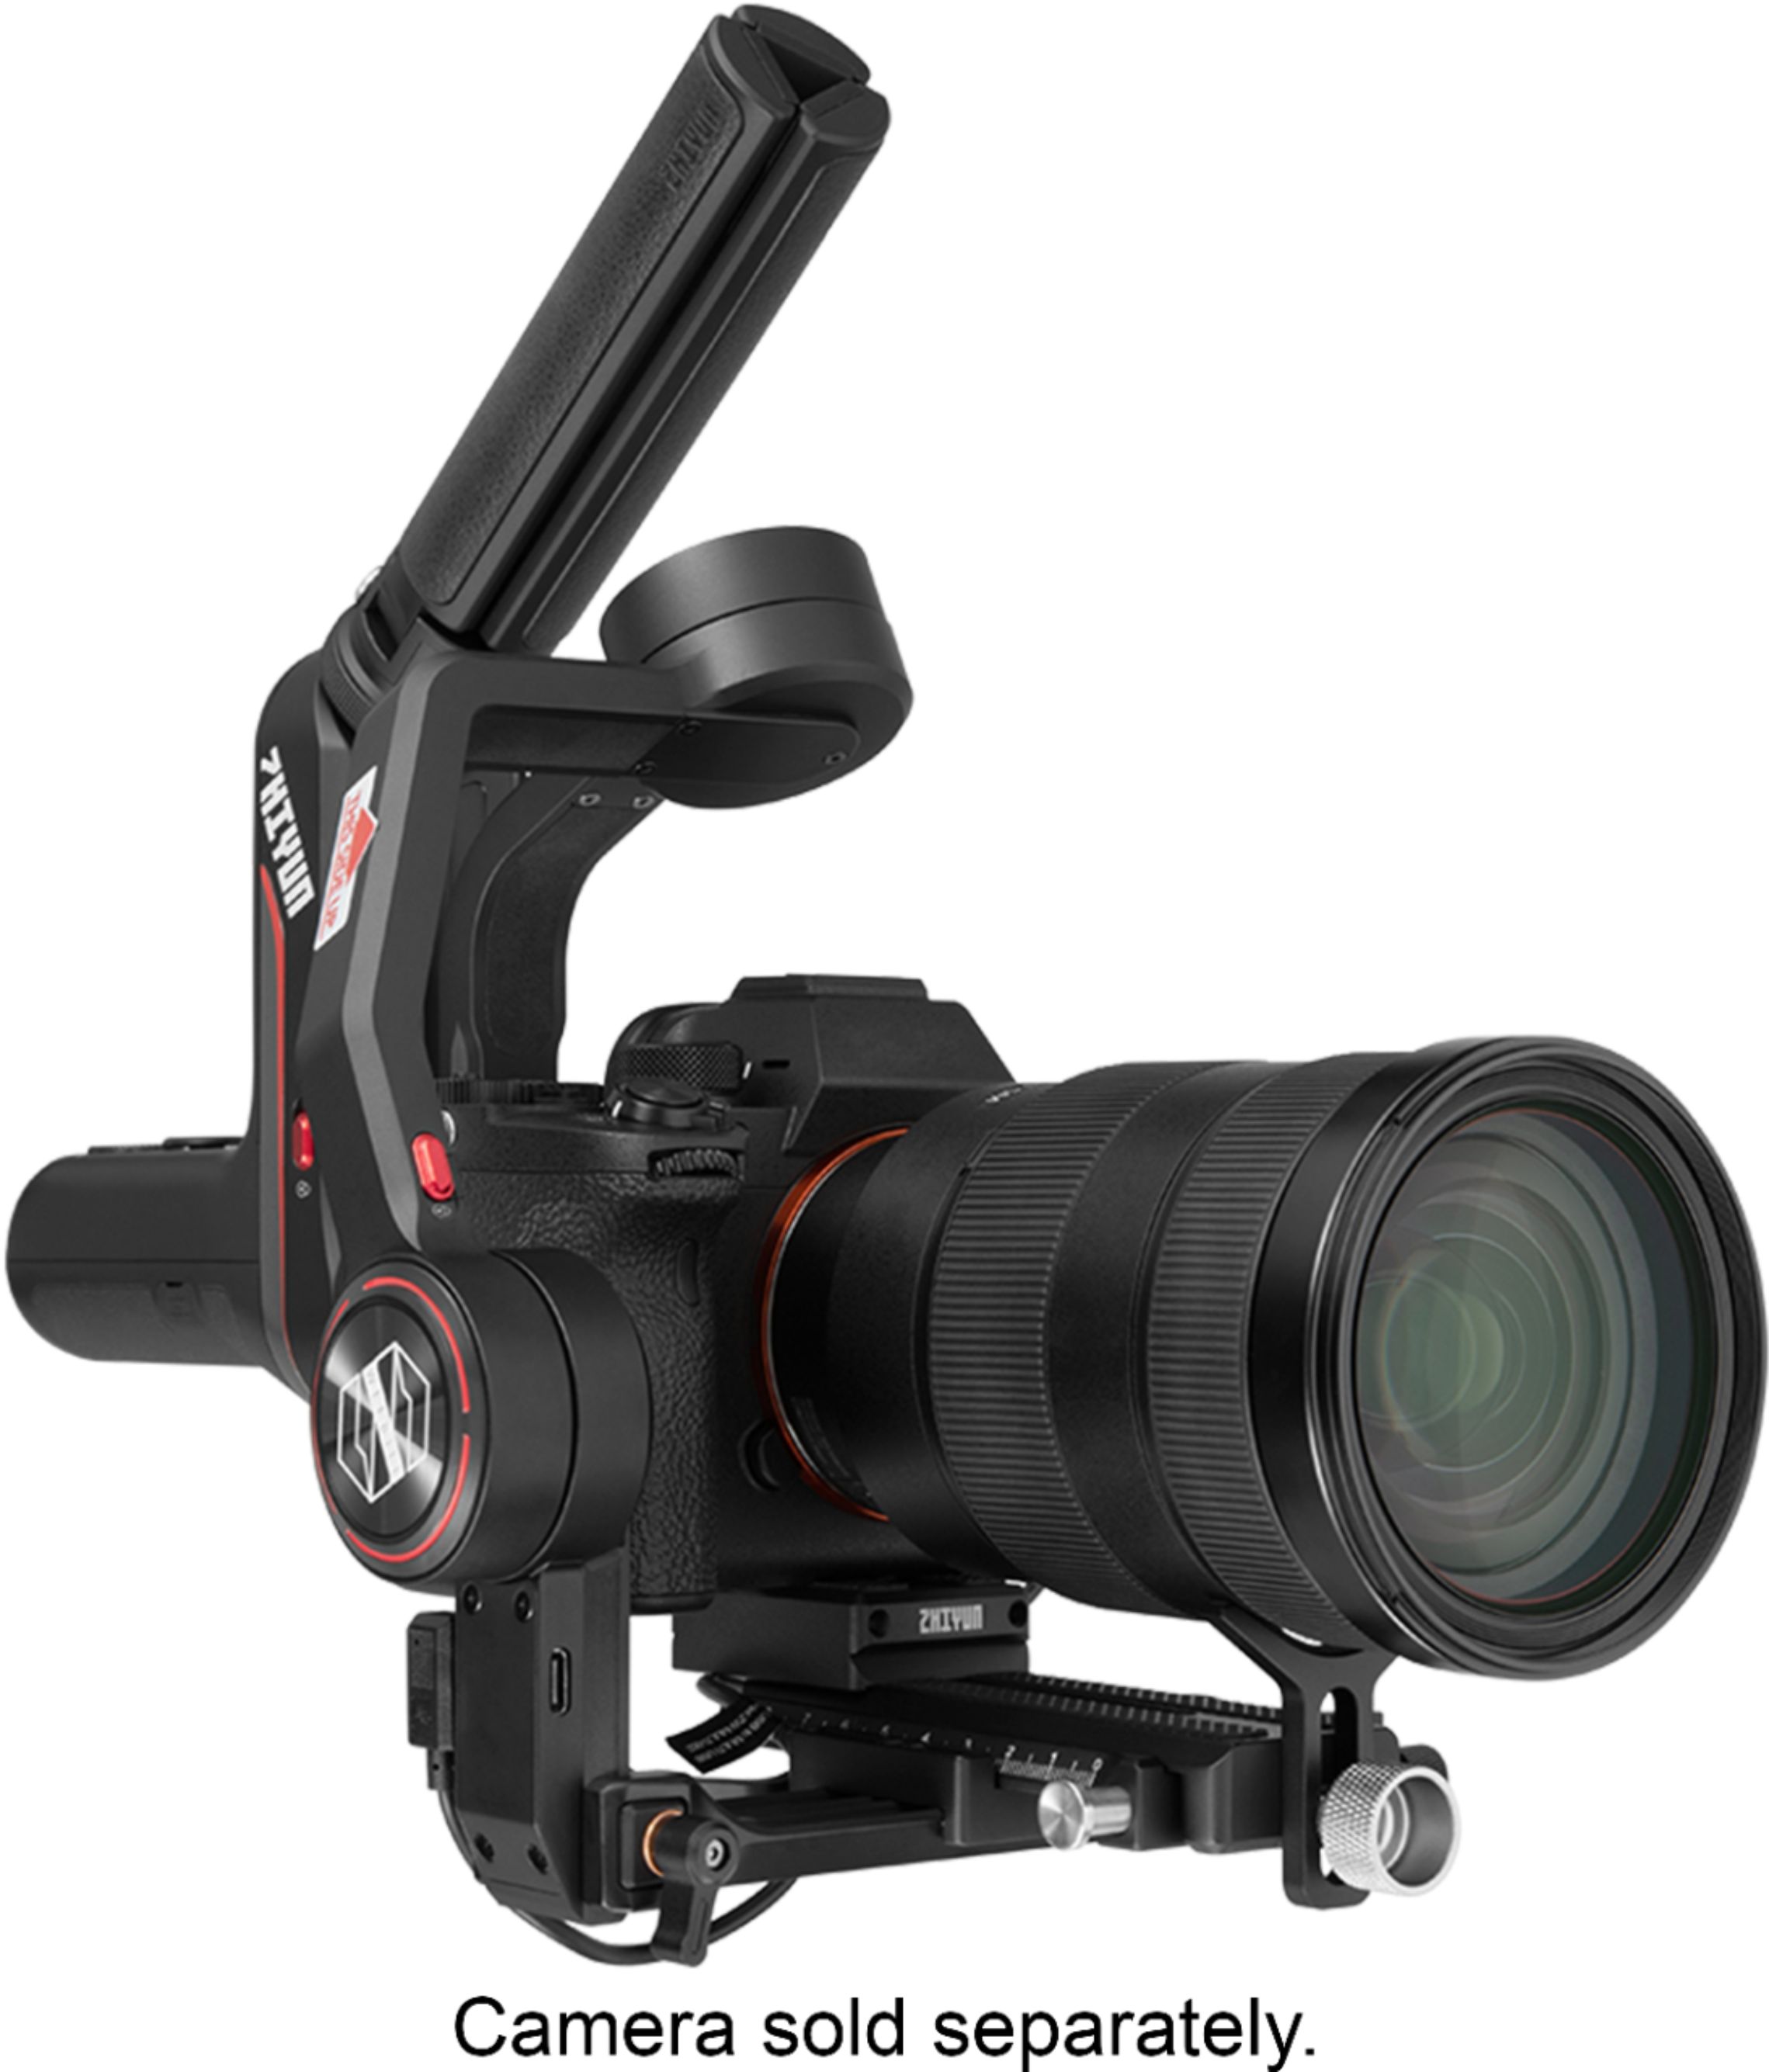 Zhiyun WEEBILL-S Compact 3-Axis Handheld Gimbal Stabilizer for 